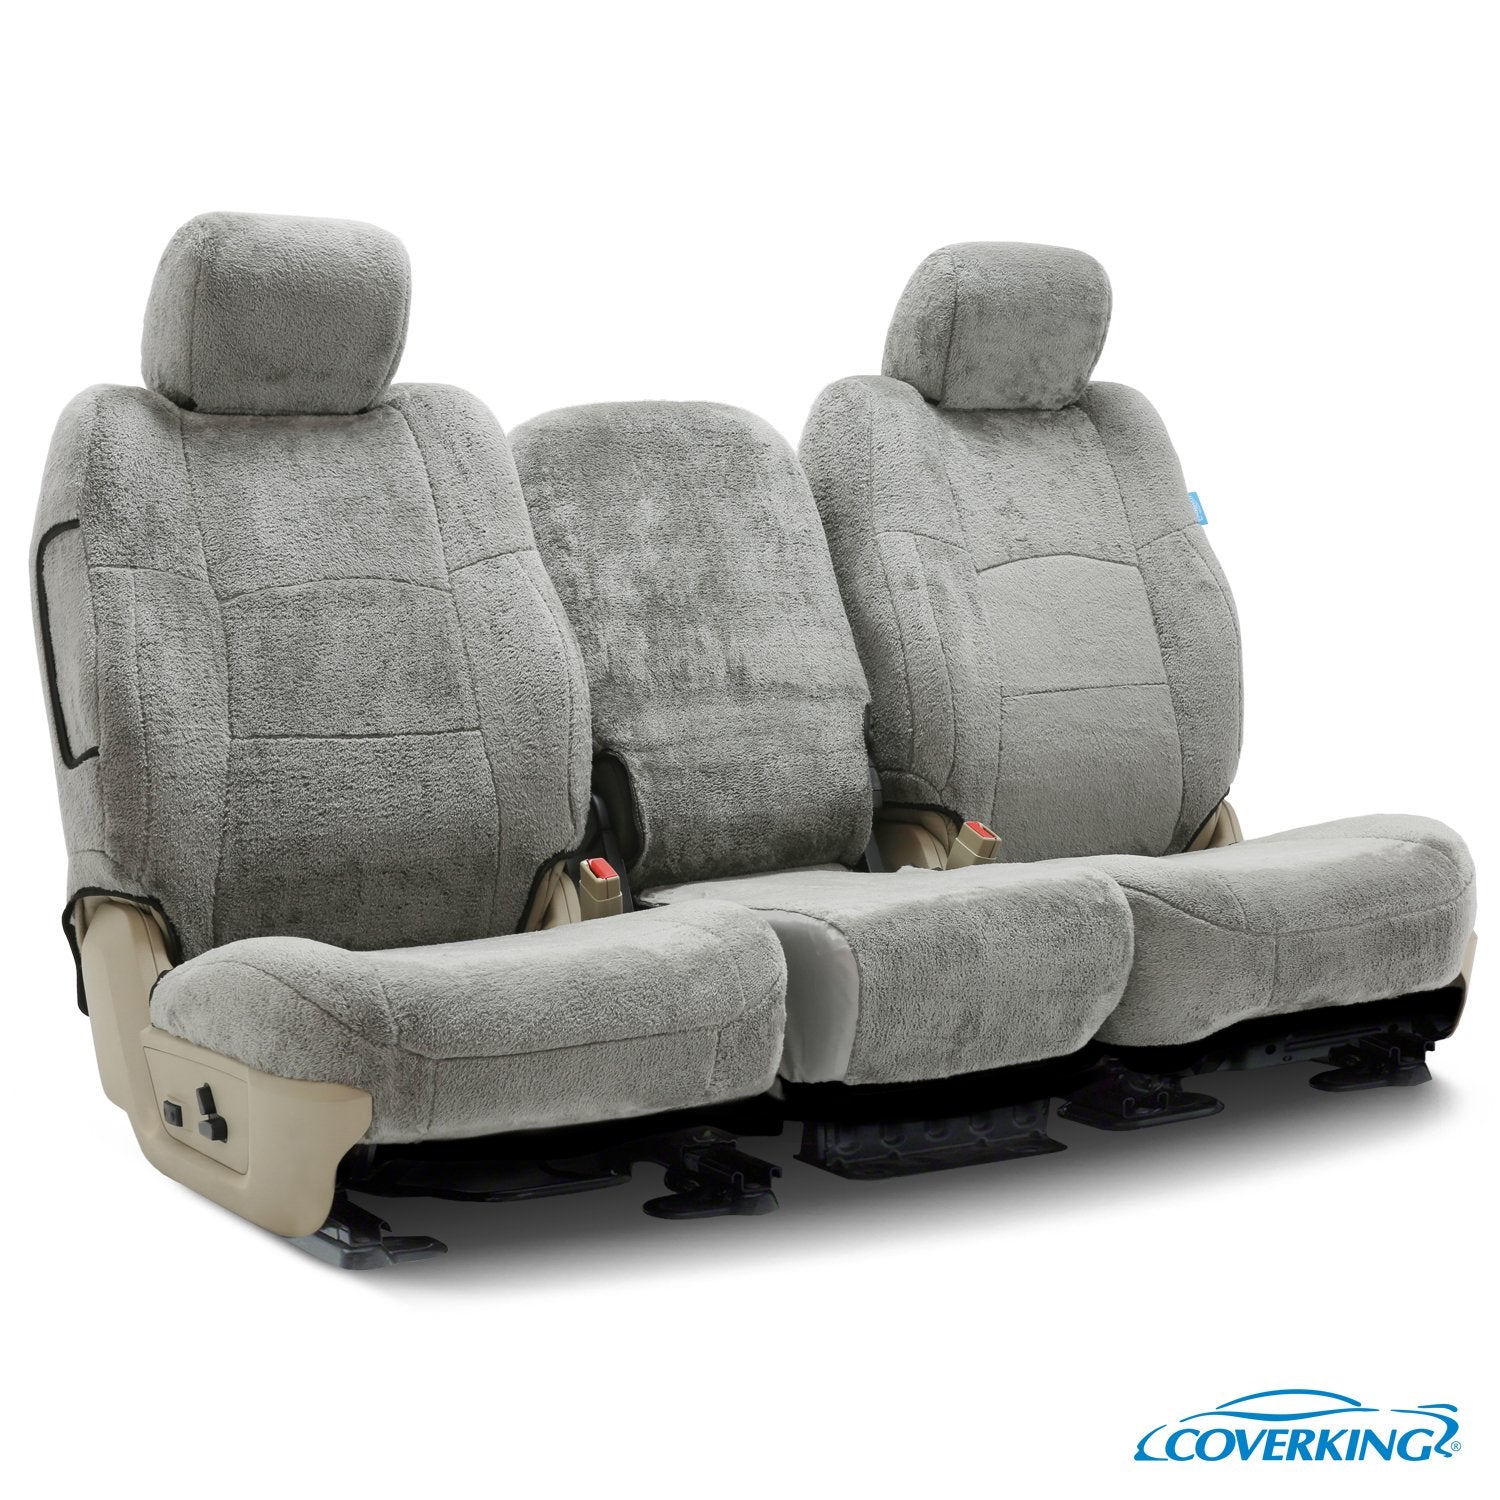 Cuddle Up In Comfort: White Bear Cushion Car Seat Cover Car